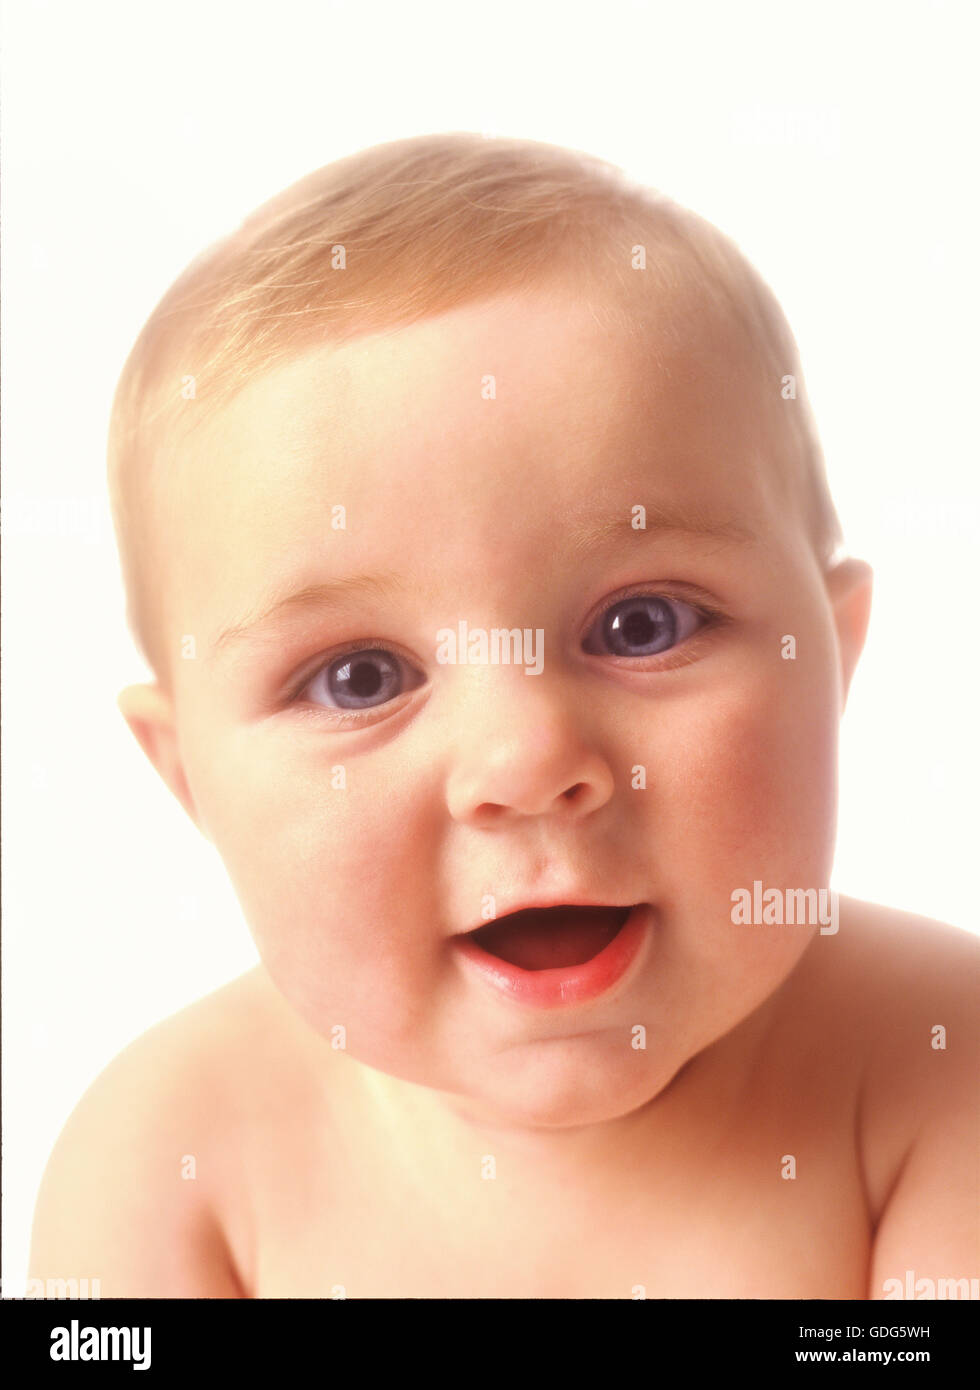 Portrait of a baby's face with blue eyes on a white background Stock Photo